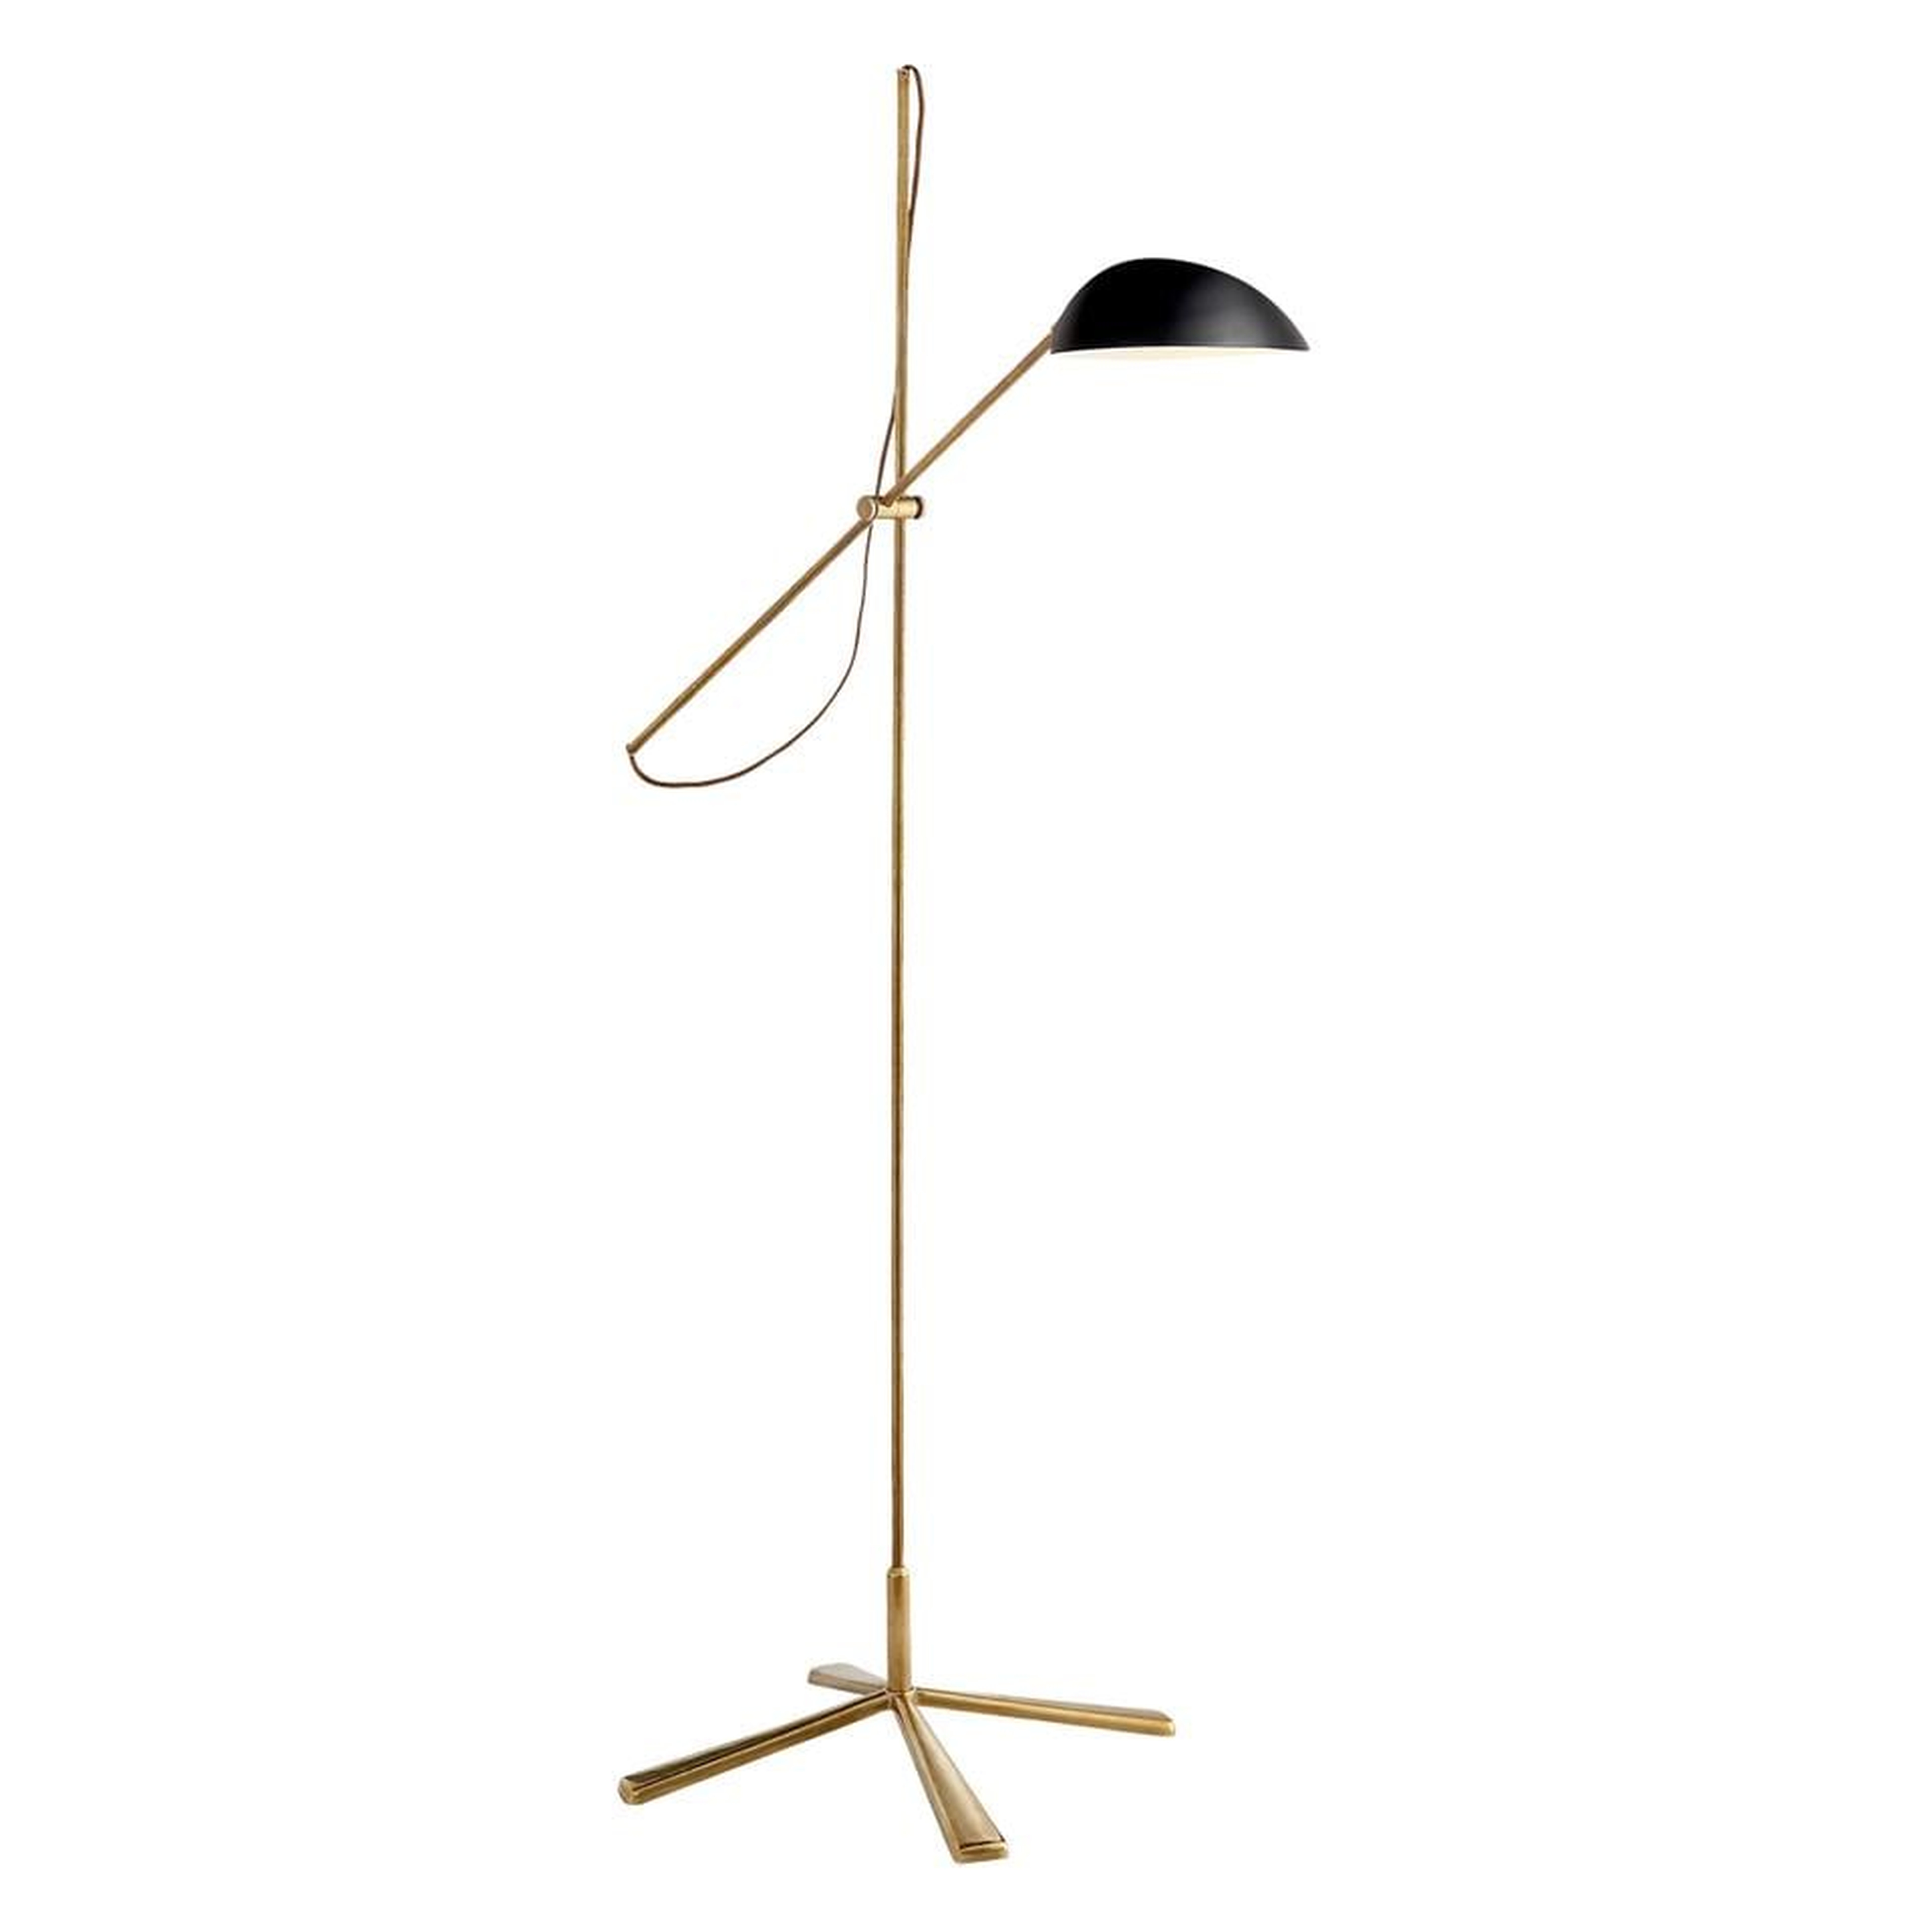 GRAPHIC FLOOR LAMP WITH BLACK SHADE - HAND-RUBBED ANTIQUE BRASS - McGee & Co.